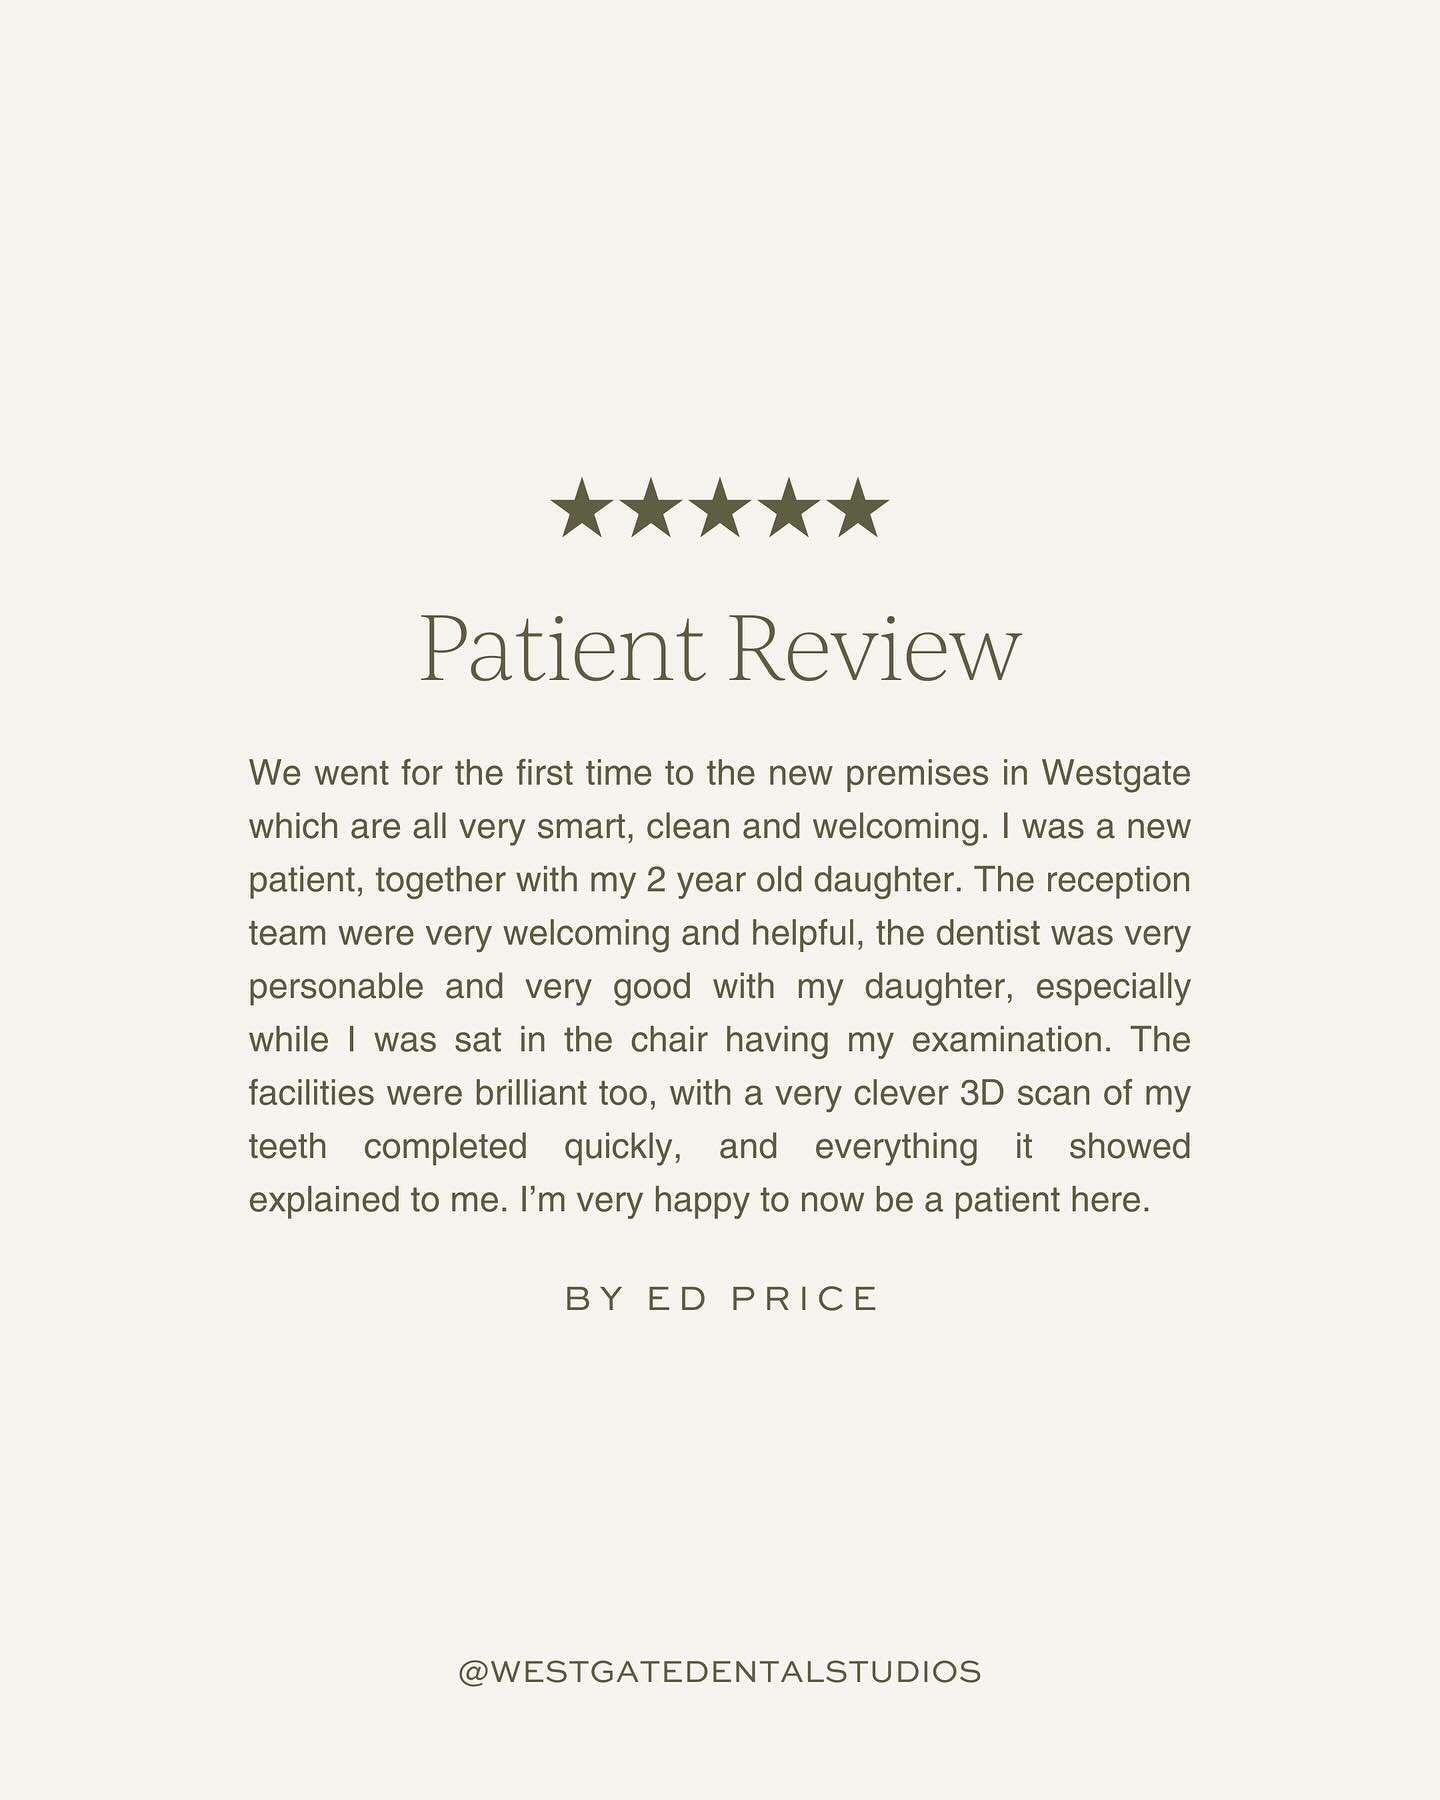 We&rsquo;re thrilled to share some heartwarming reviews from our amazing patients! At our practice, we strive to deliver nothing but the best experience from start to finish. From our welcoming reception team to our skilled dental professionals, your